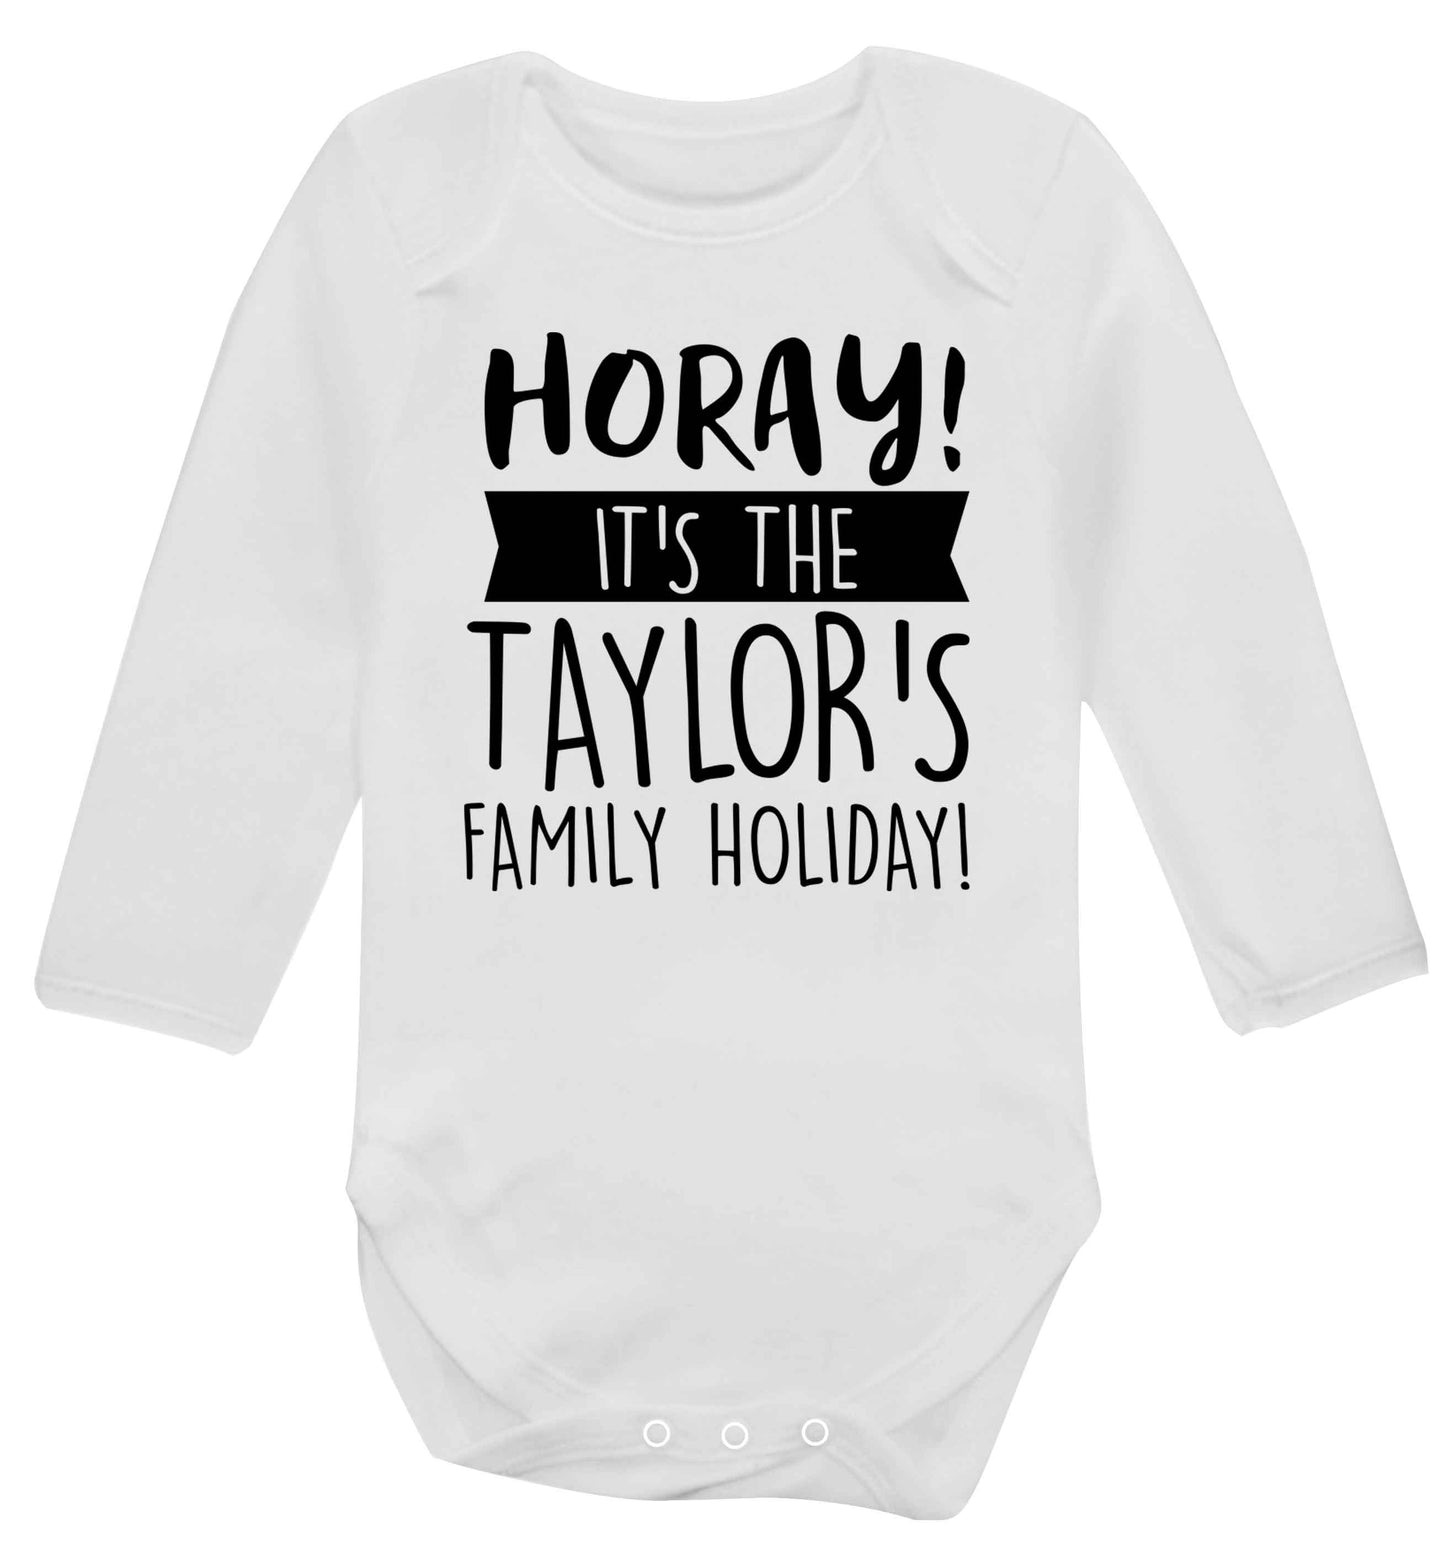 Horay it's the Taylor's family holiday! personalised item Baby Vest long sleeved white 6-12 months